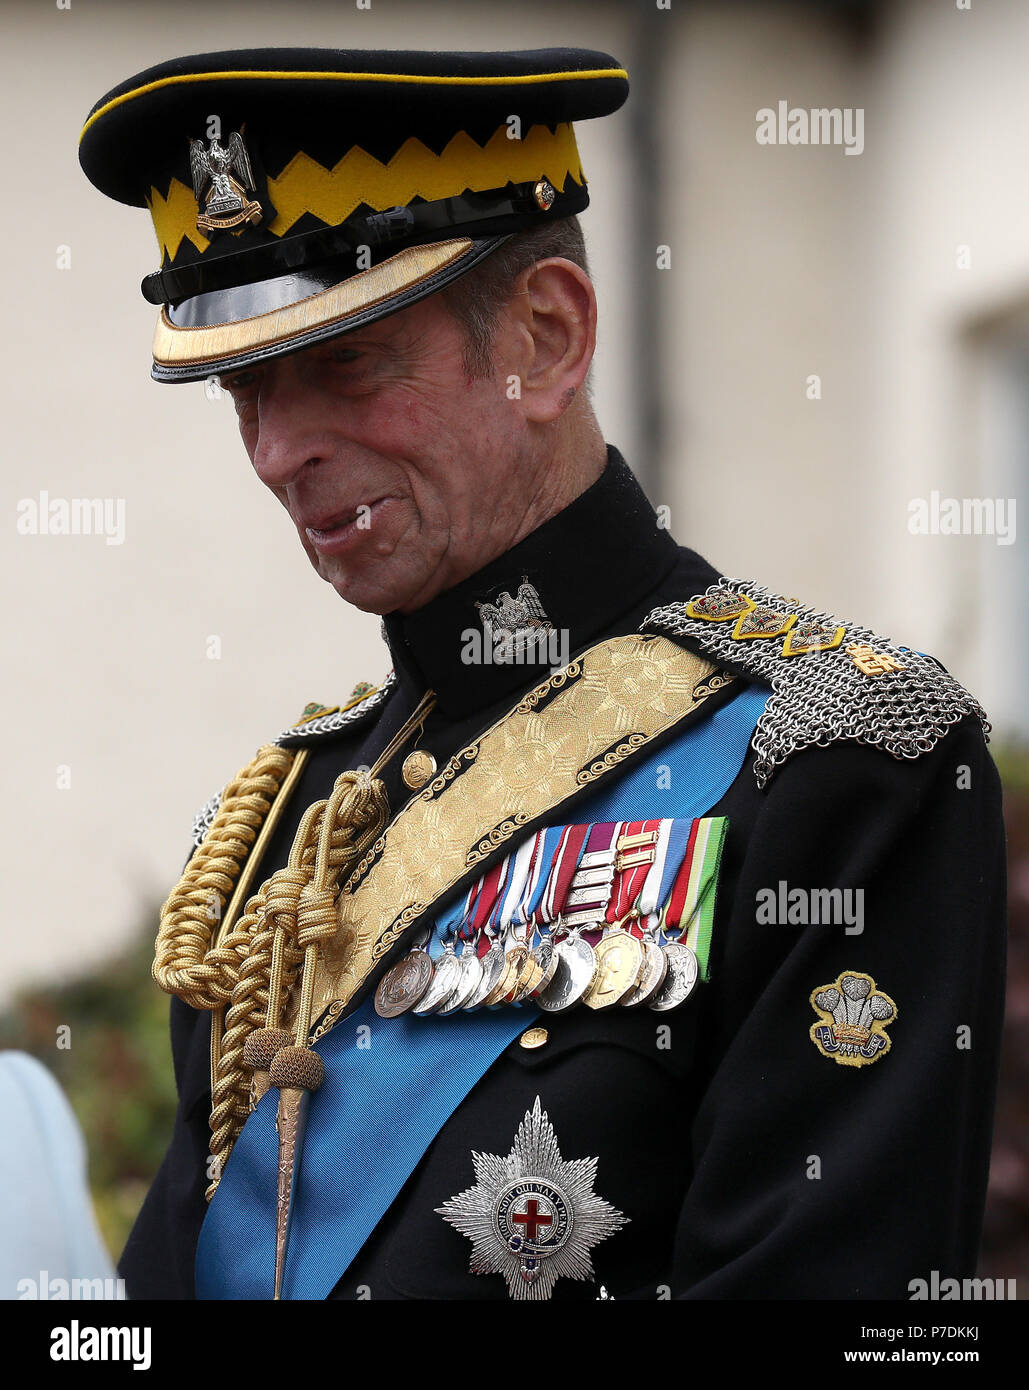 The Duke of Kent, Deputy Colonel-in-Chief of the Royal Scots Dragoon Guards (Carabiniers and Greys) at Leuchers Station as Queen Elizabeth II visited the base to present a New Standard. Stock Photo